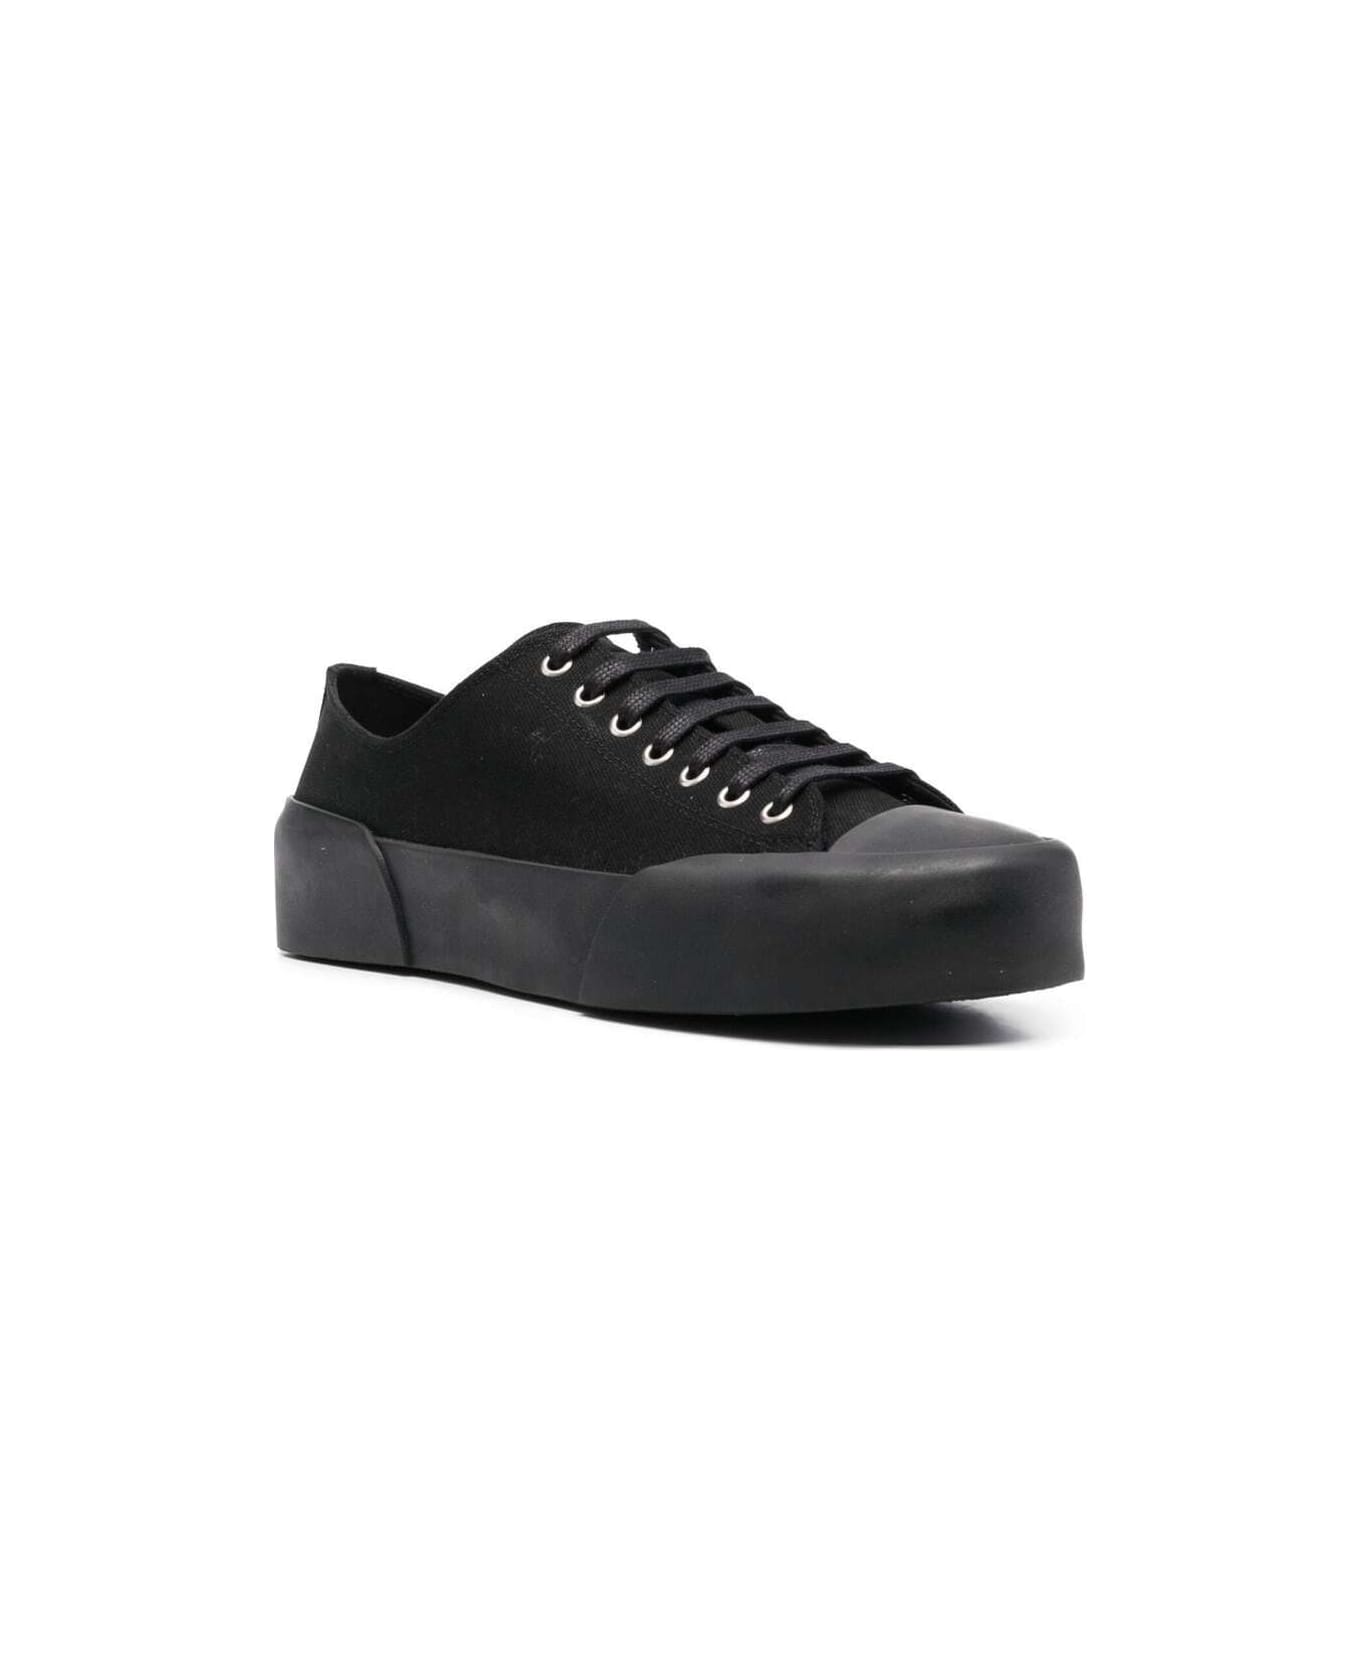 Jil Sander Black Low Top Sneakers In Canvas And Leather Man - Black スニーカー